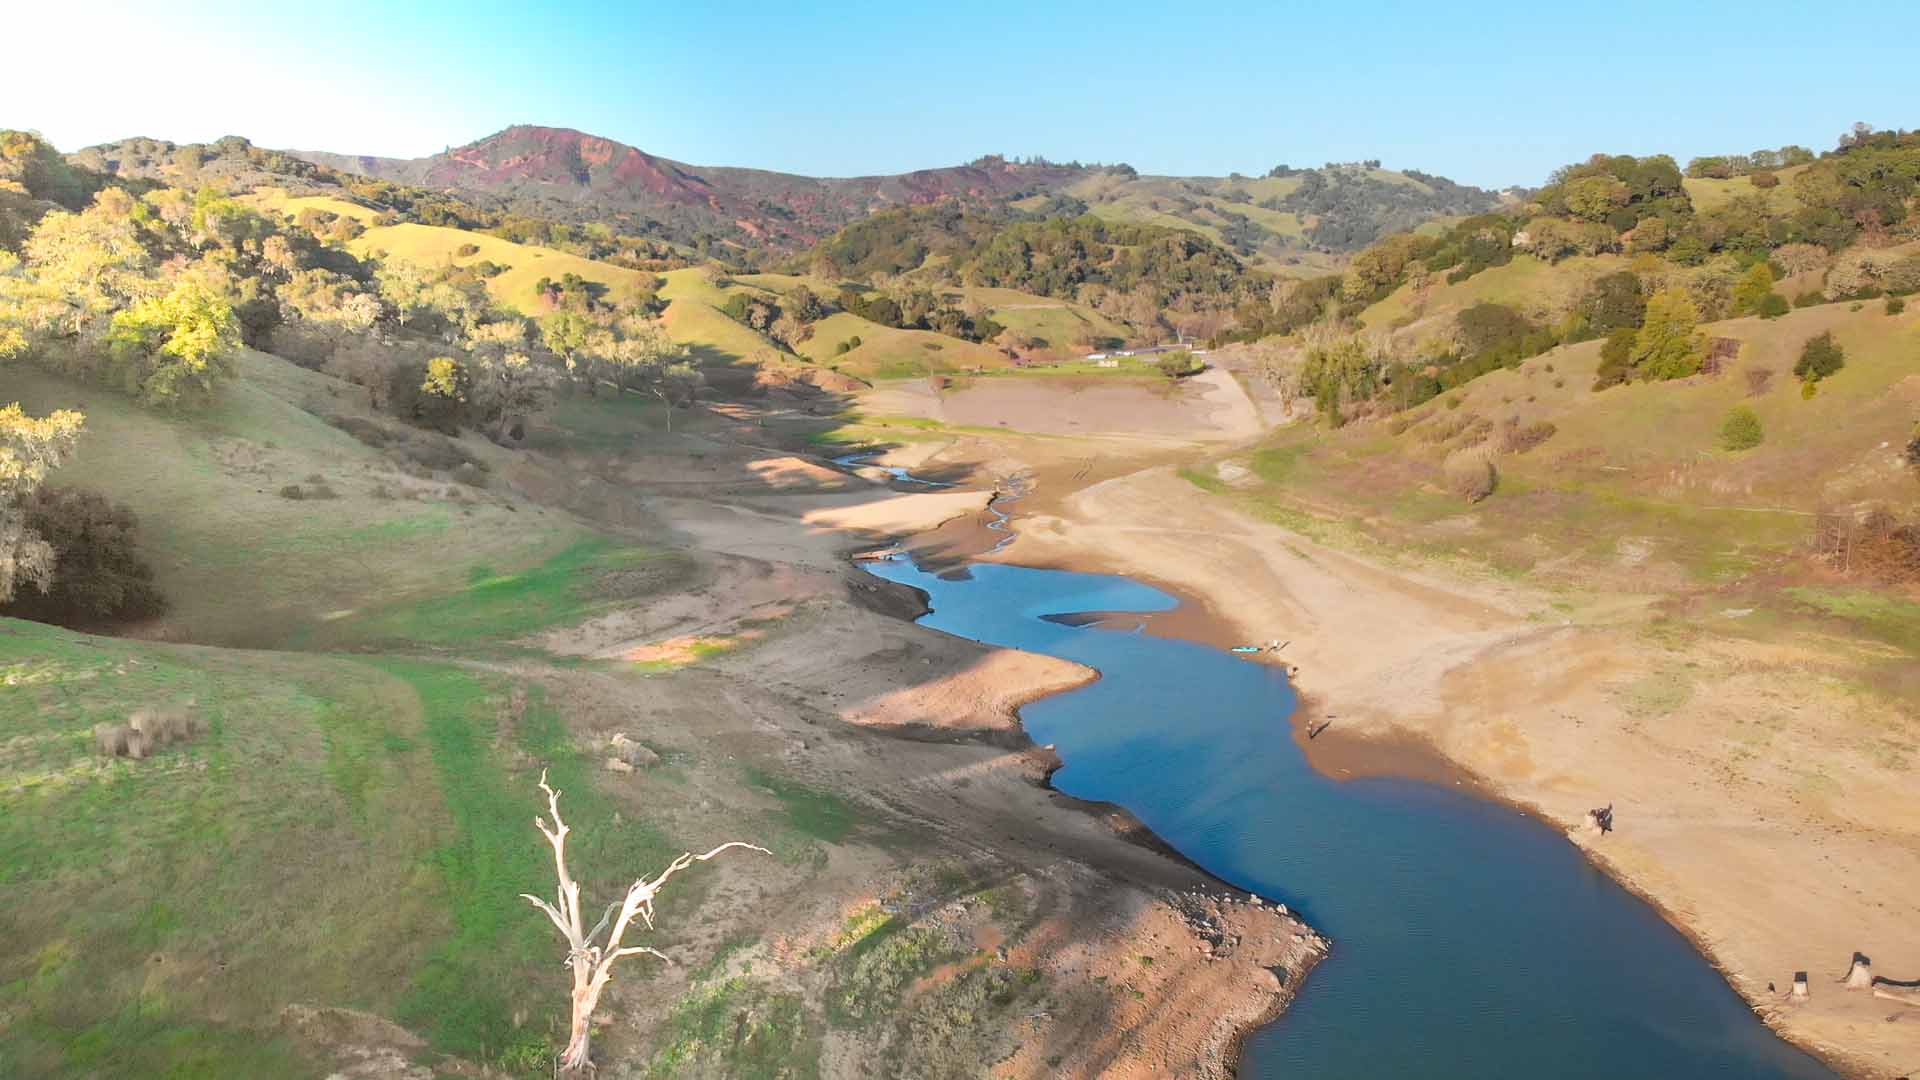 Drone Shot of Yorty Creek in Cloverdale, CA